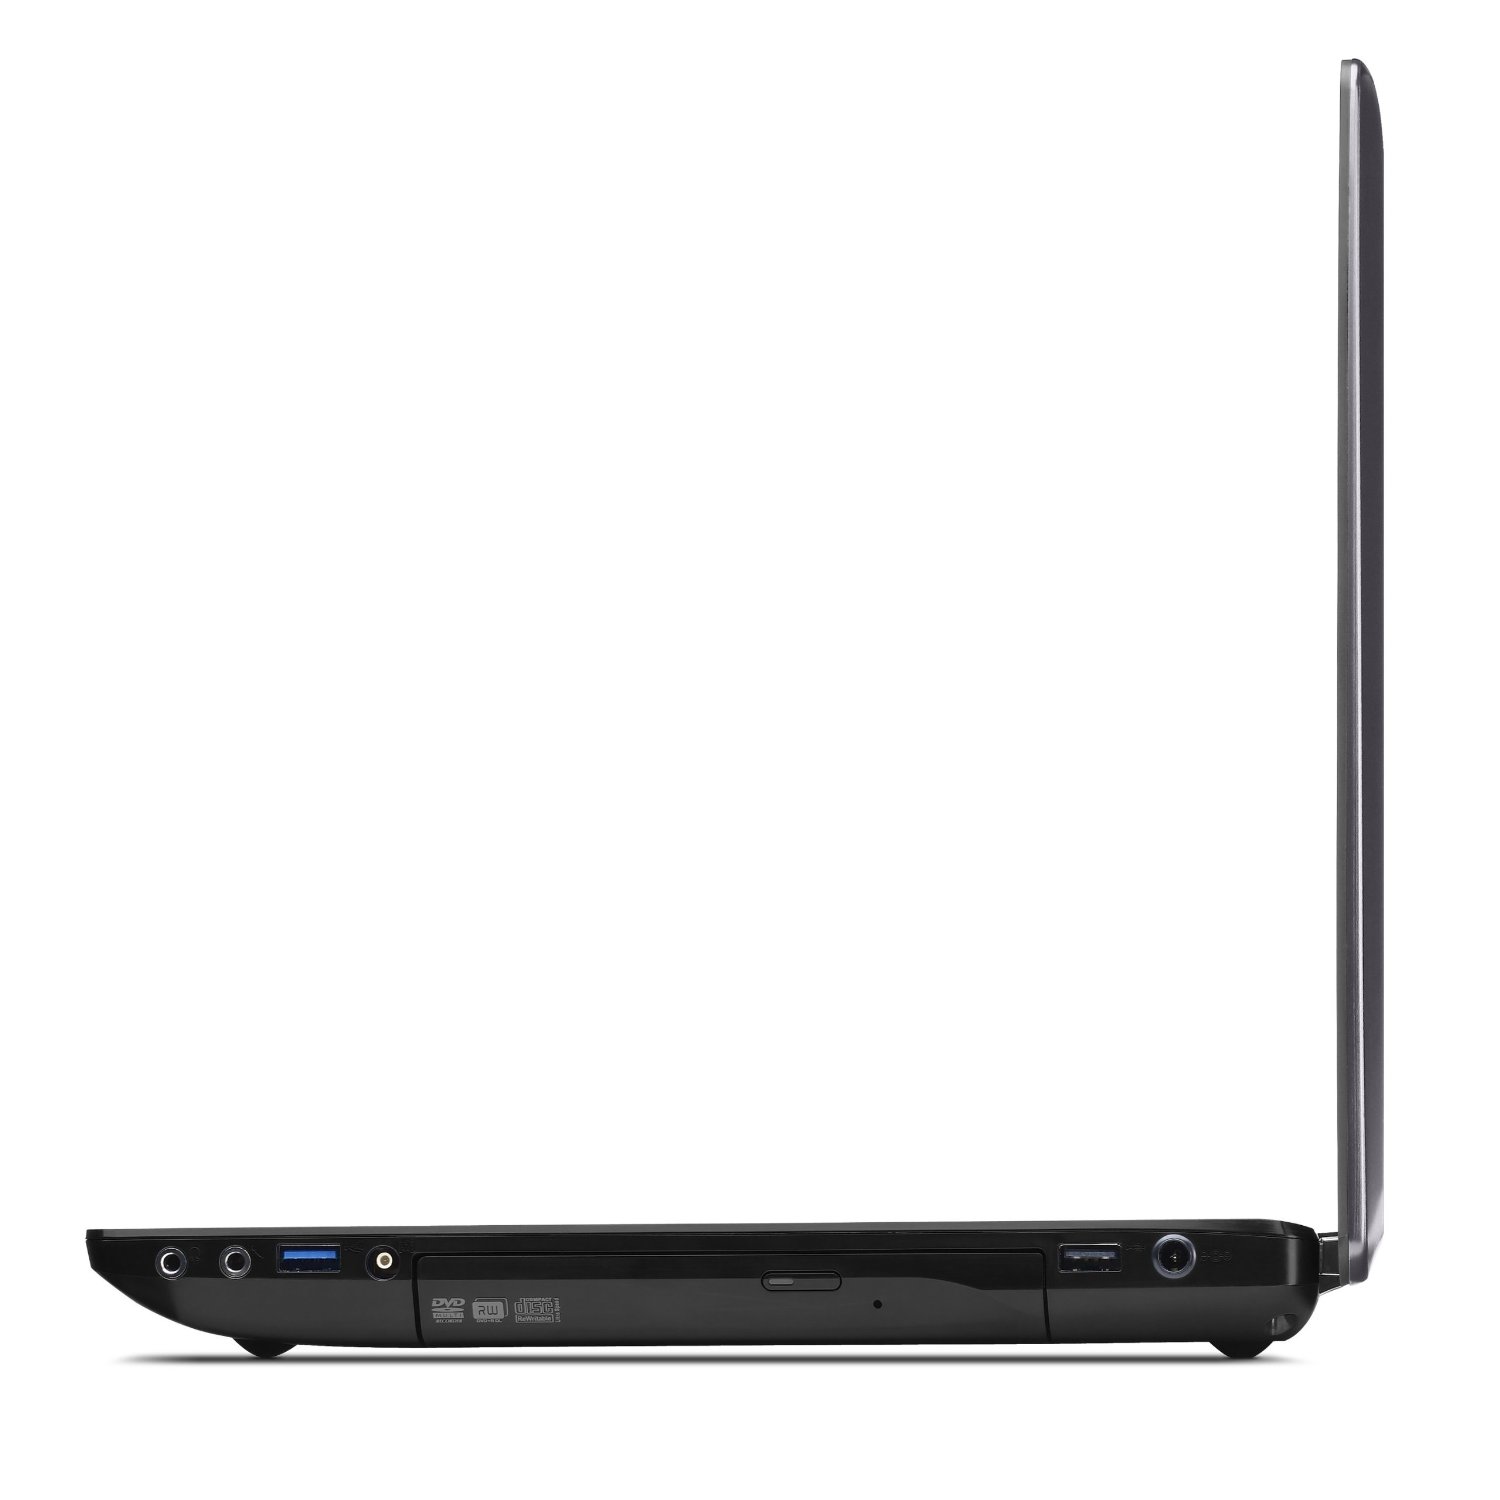 http://thetechjournal.com/wp-content/uploads/images/1209/1346654145-lenovos-bulky-ideapad-y580-156inch-laptop-3.jpg